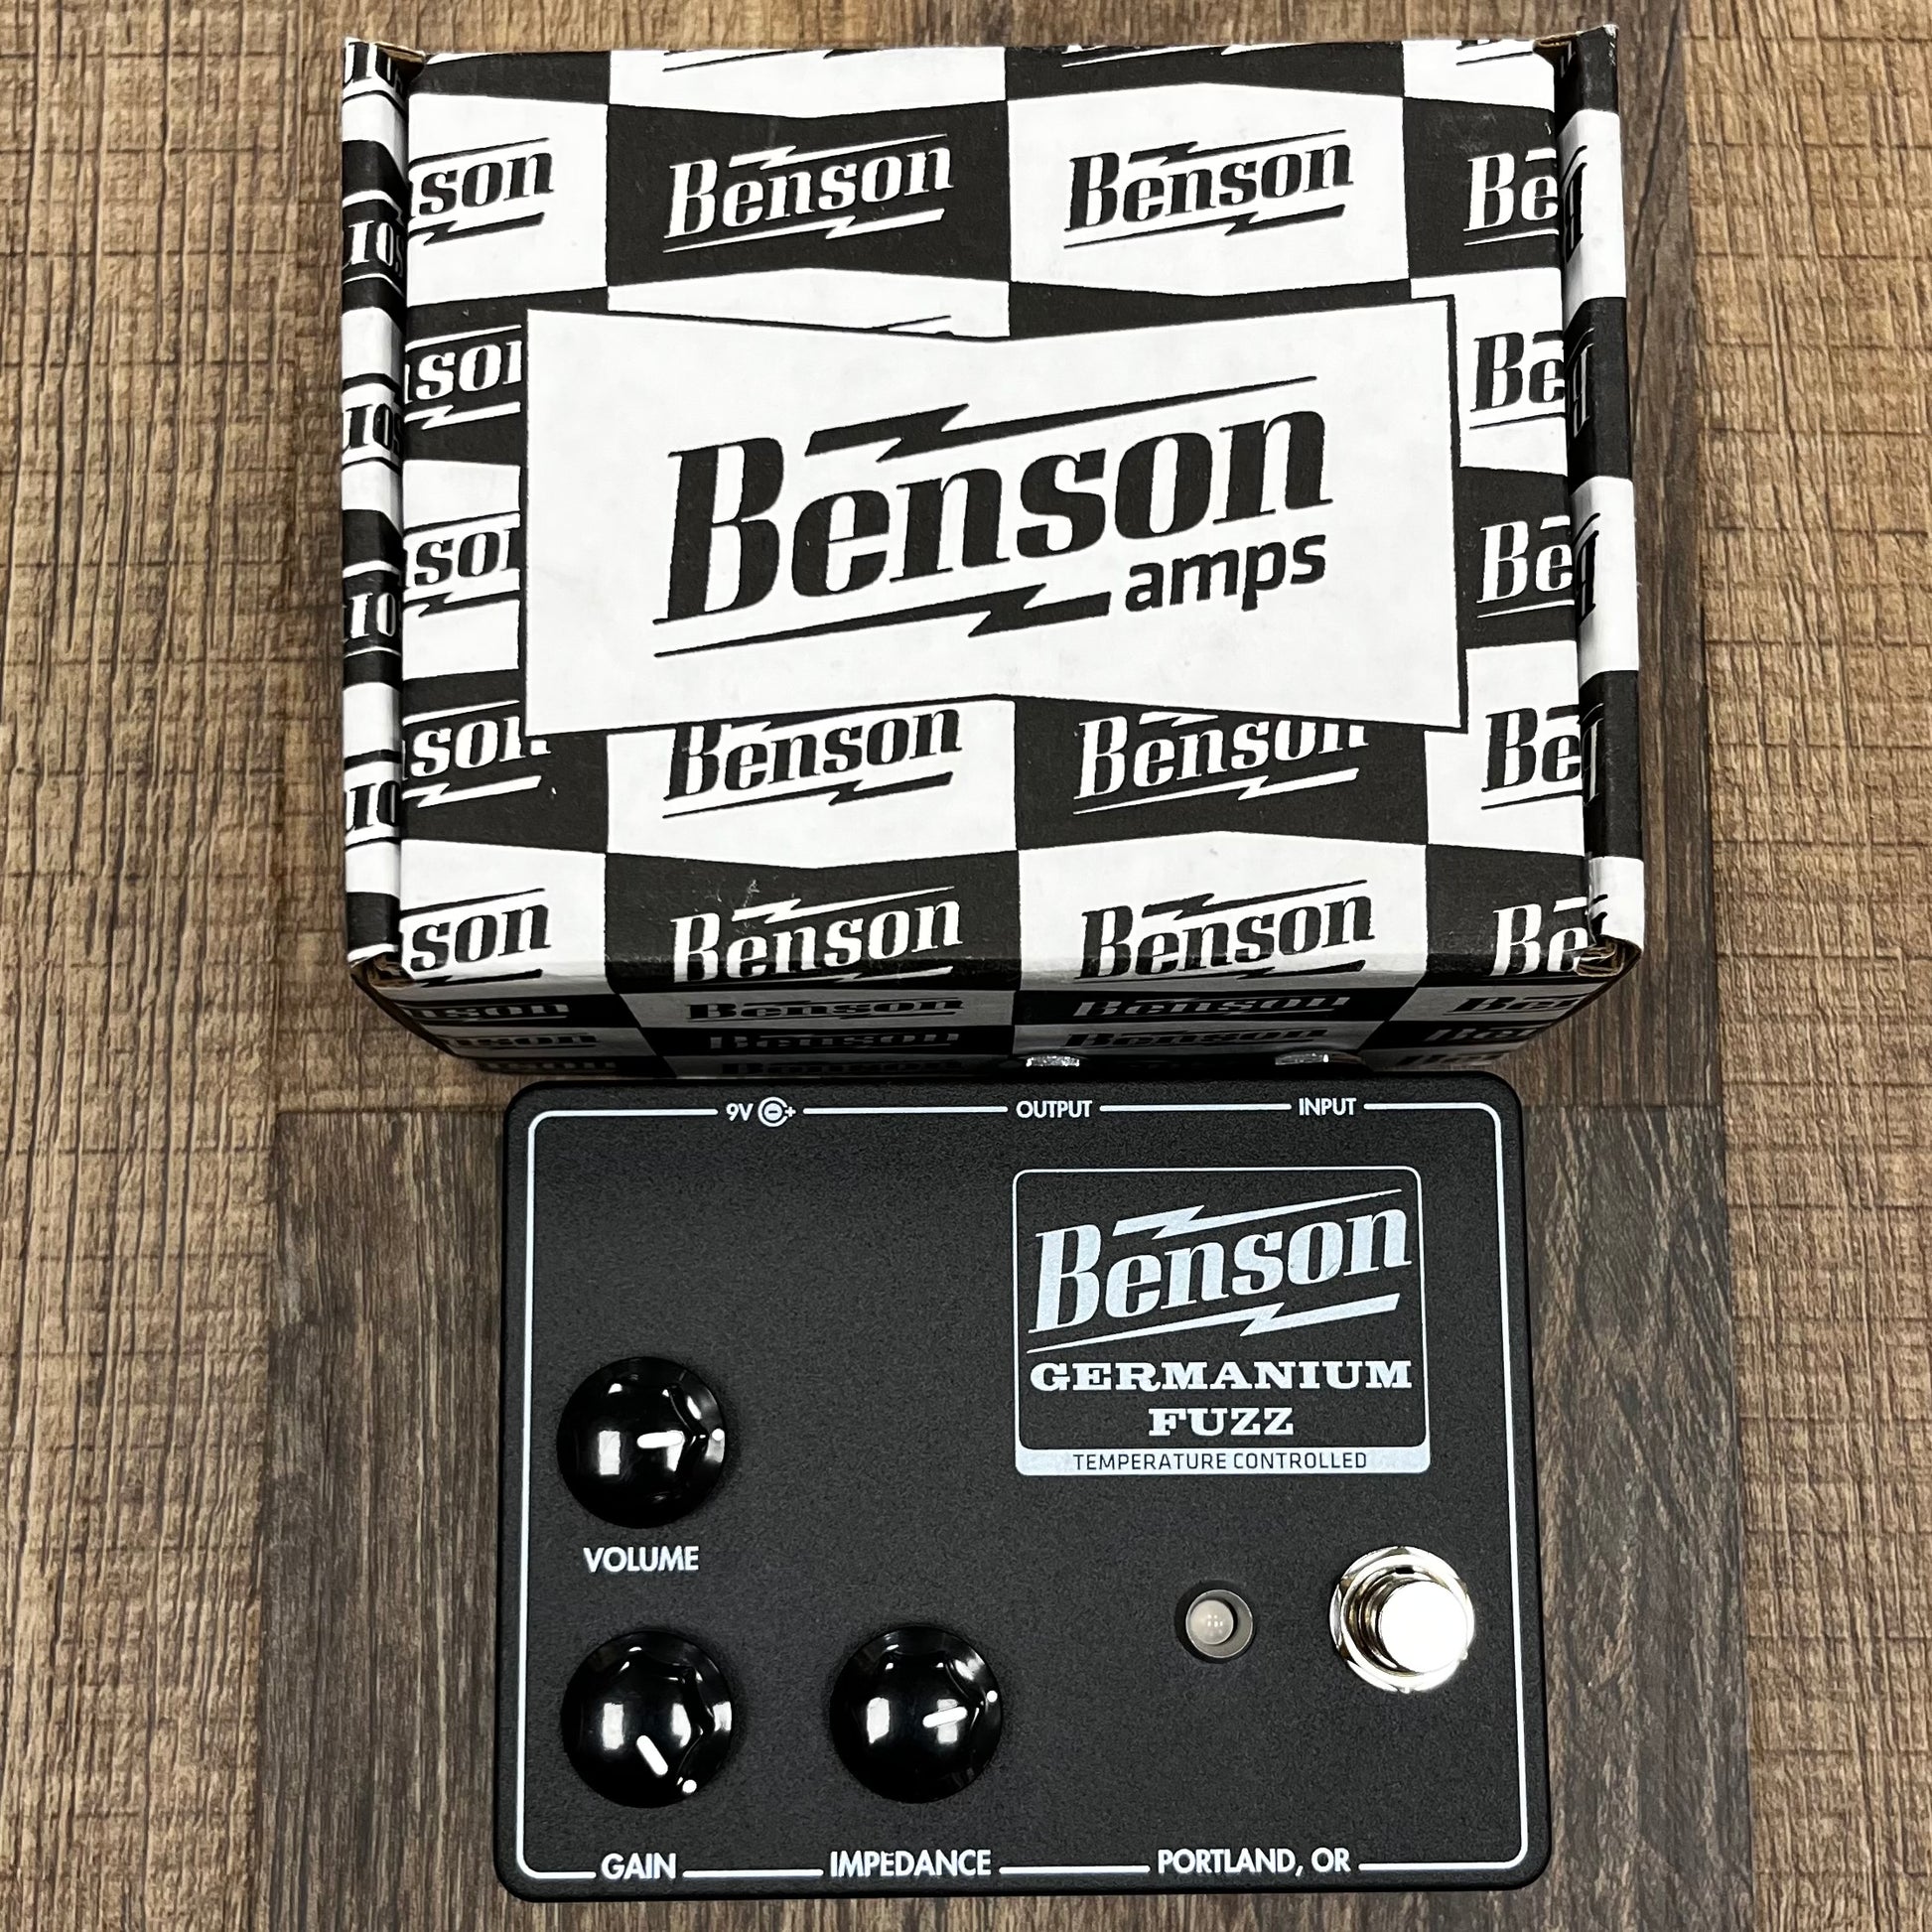 Top of w/box of Used Benson Amps Germanium Fuzz Pedal w/Box TFW91